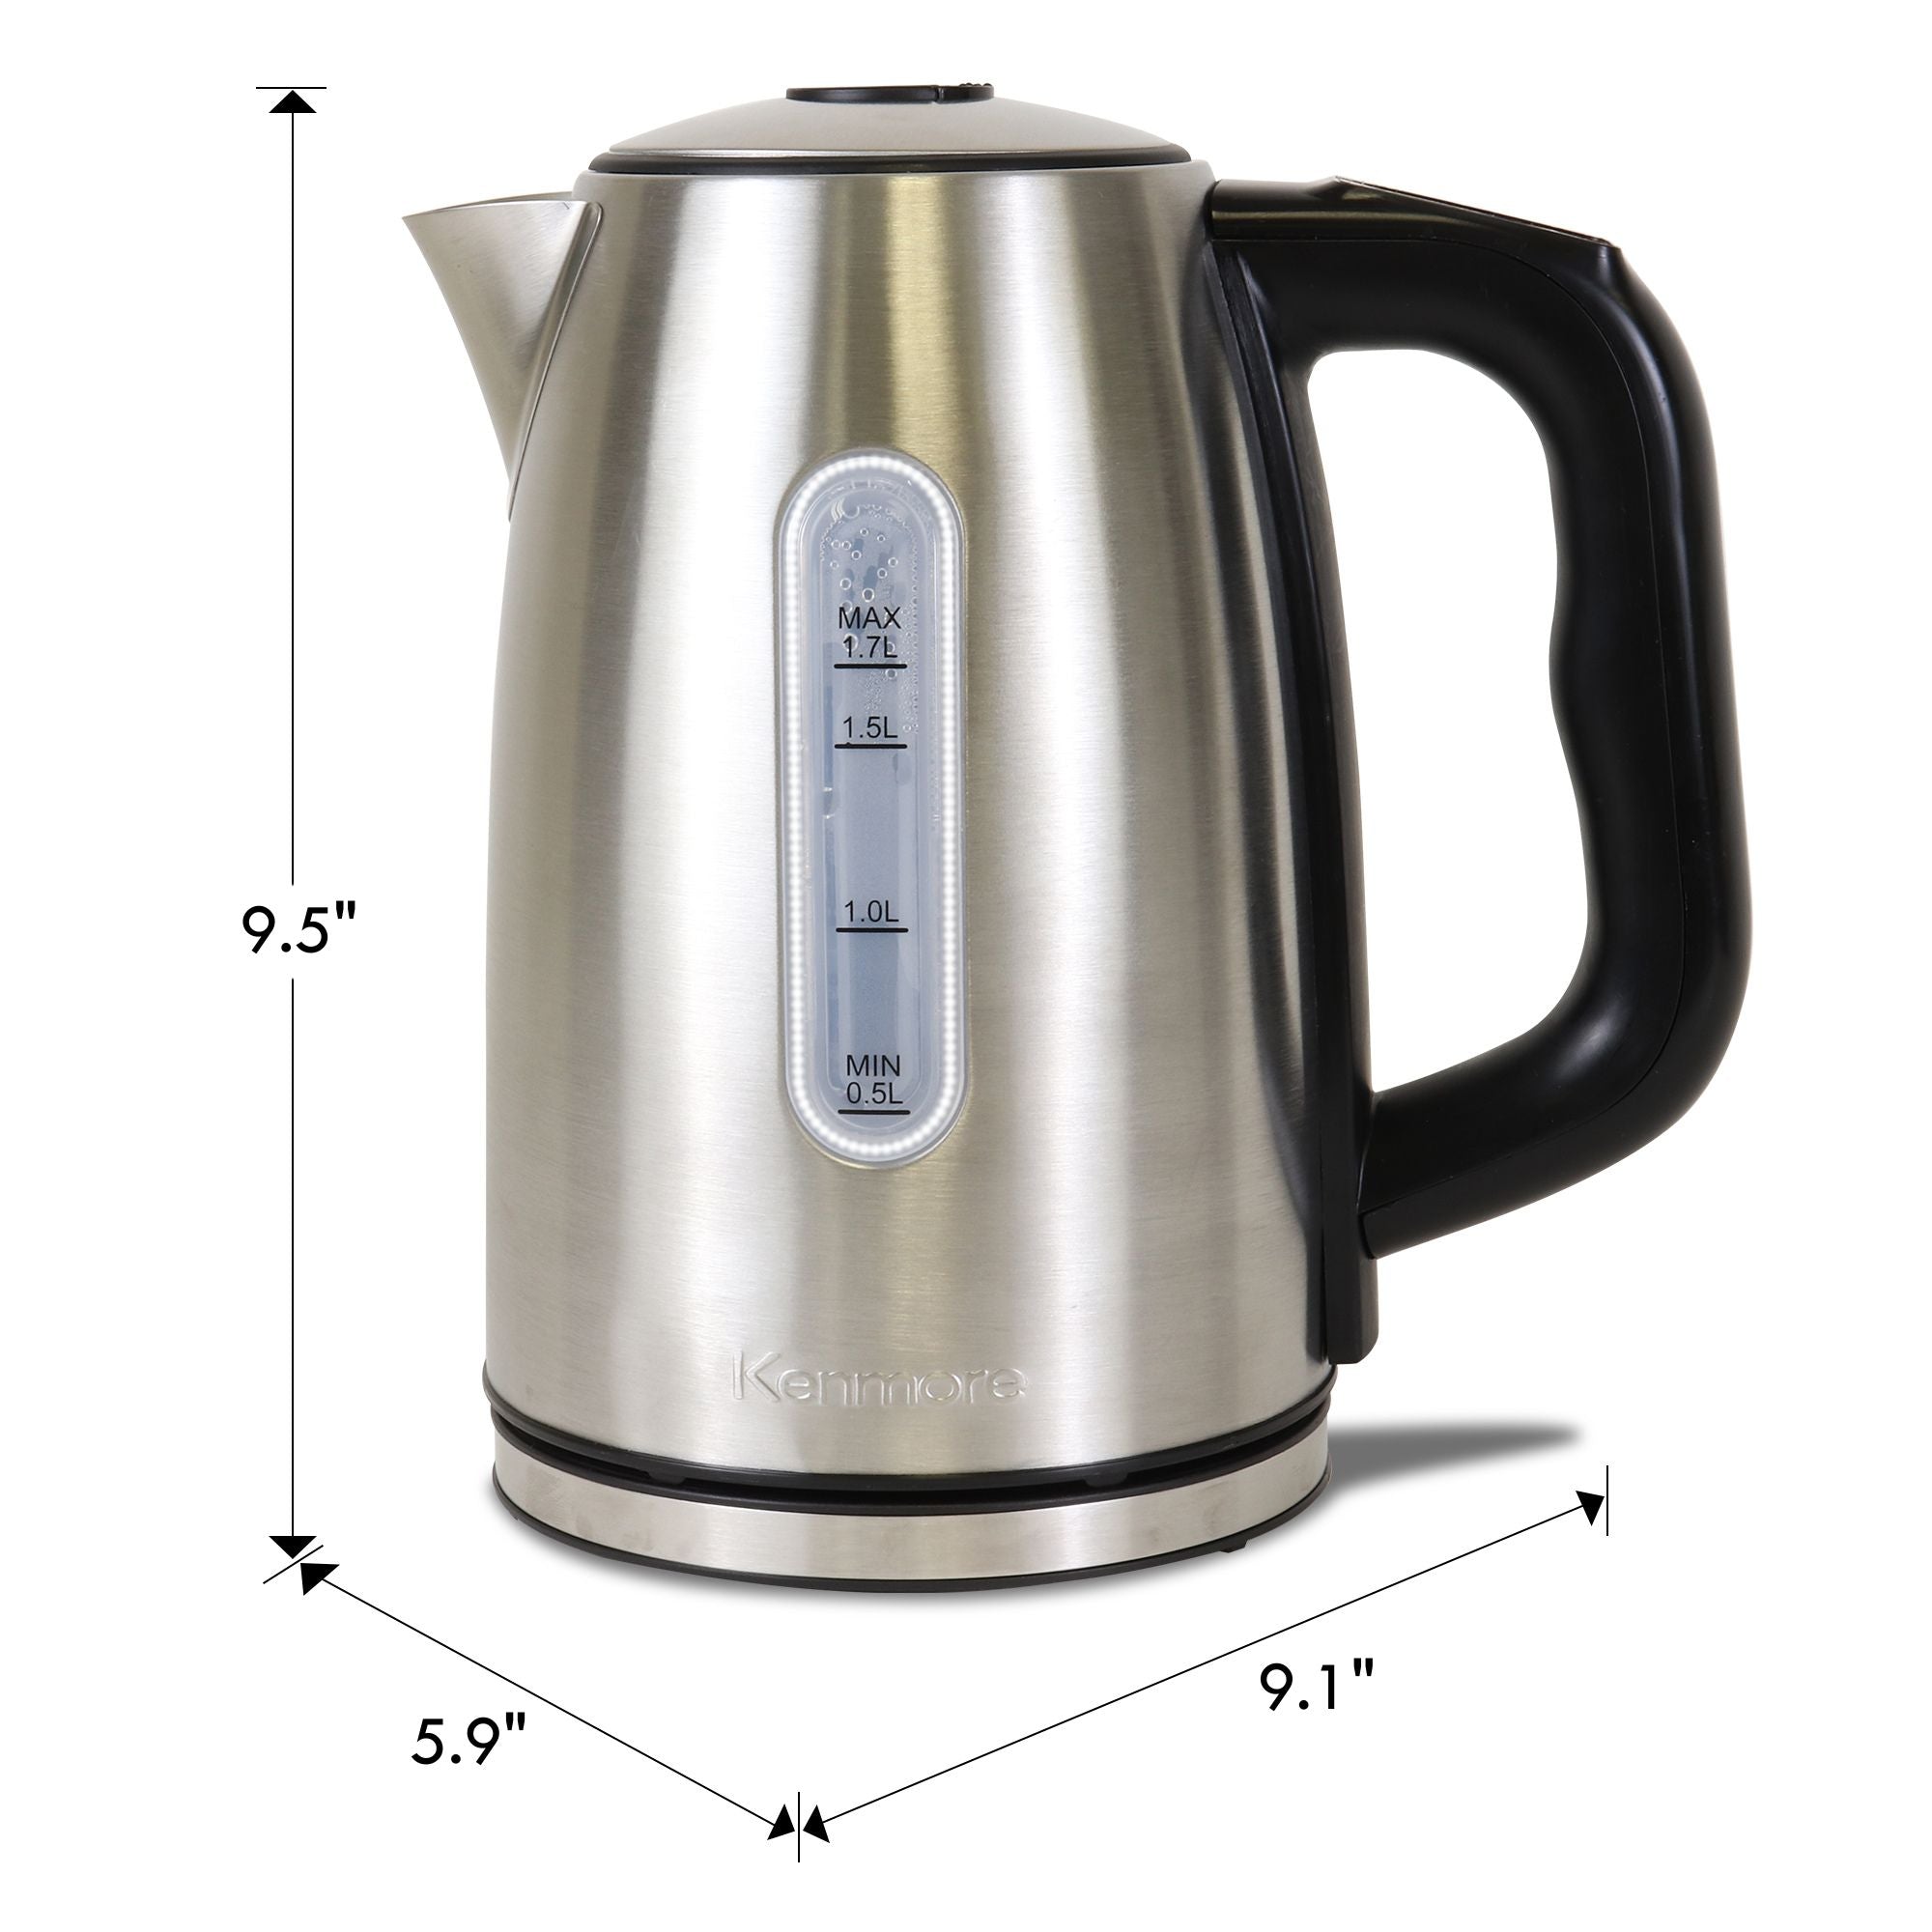 Kenmore stainless steel digital electric kettle on a white background with dimensions labeled